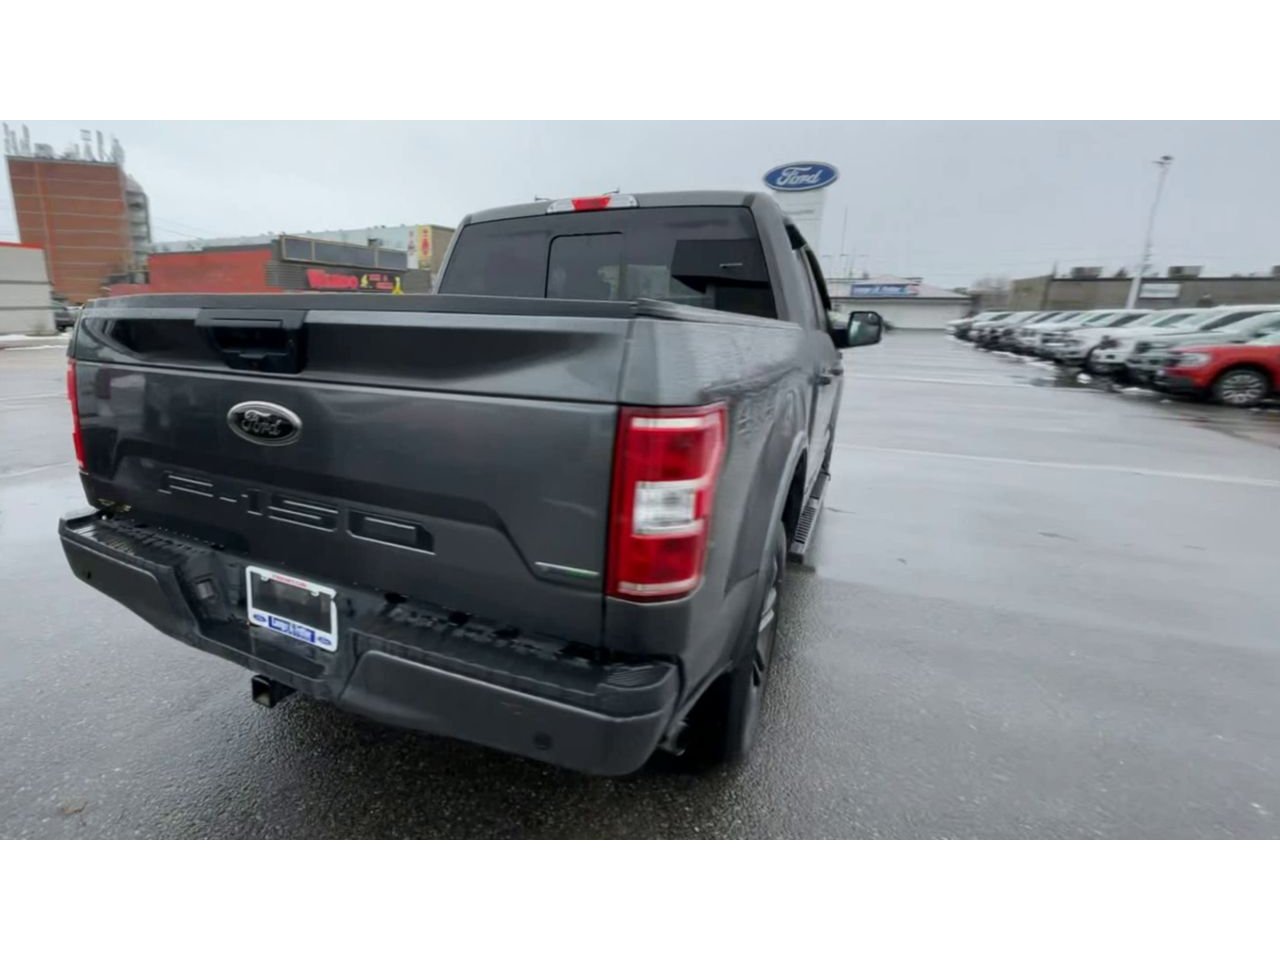 2020 Ford F-150 - P21579A Full Image 8